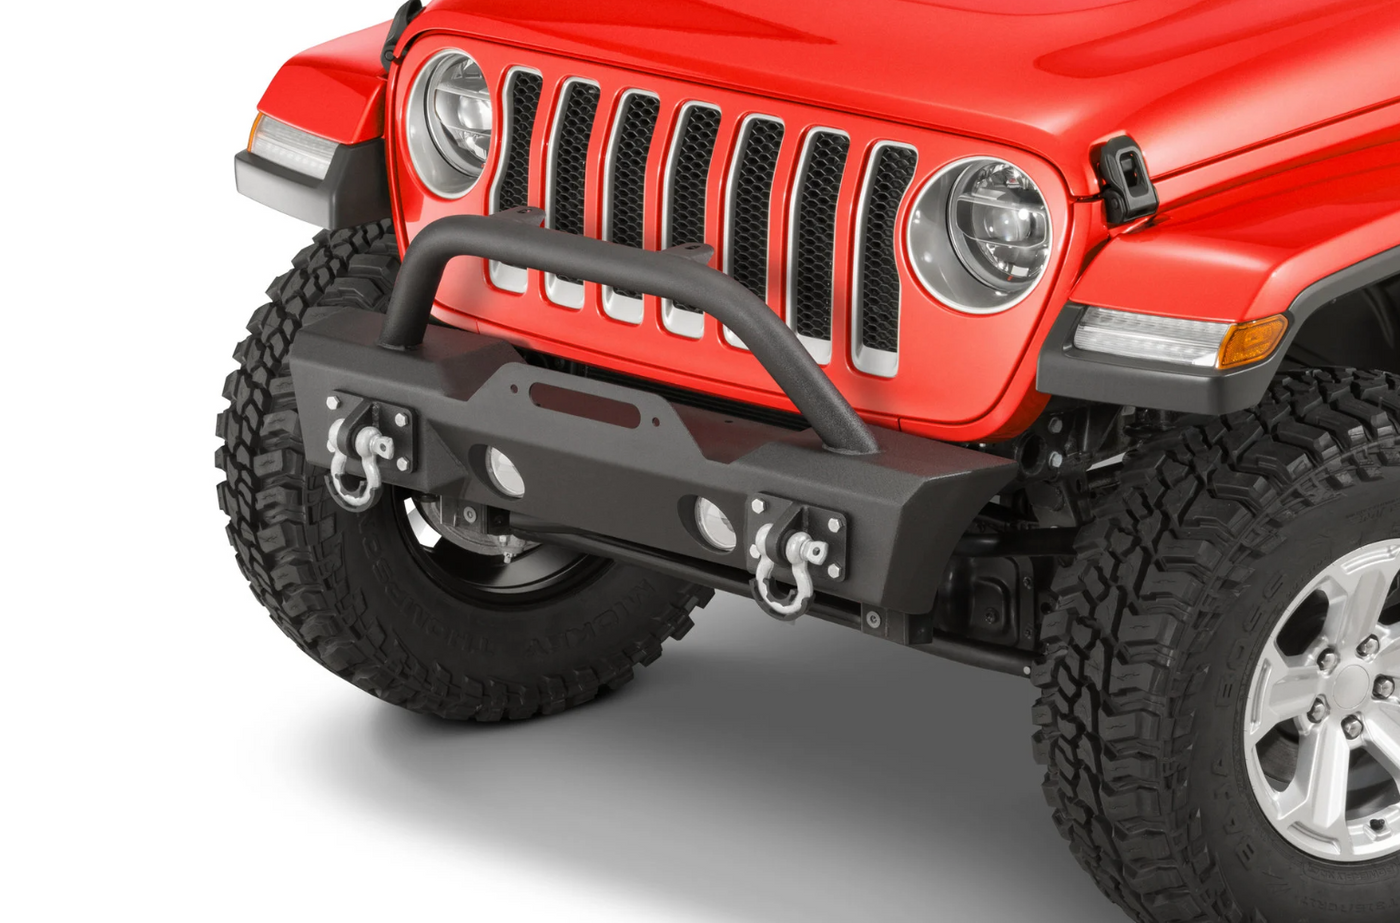 TACTIK Stubby Front Bumper with Hoop for 18-22 Jeep Wrangler JL & Gladiator JT